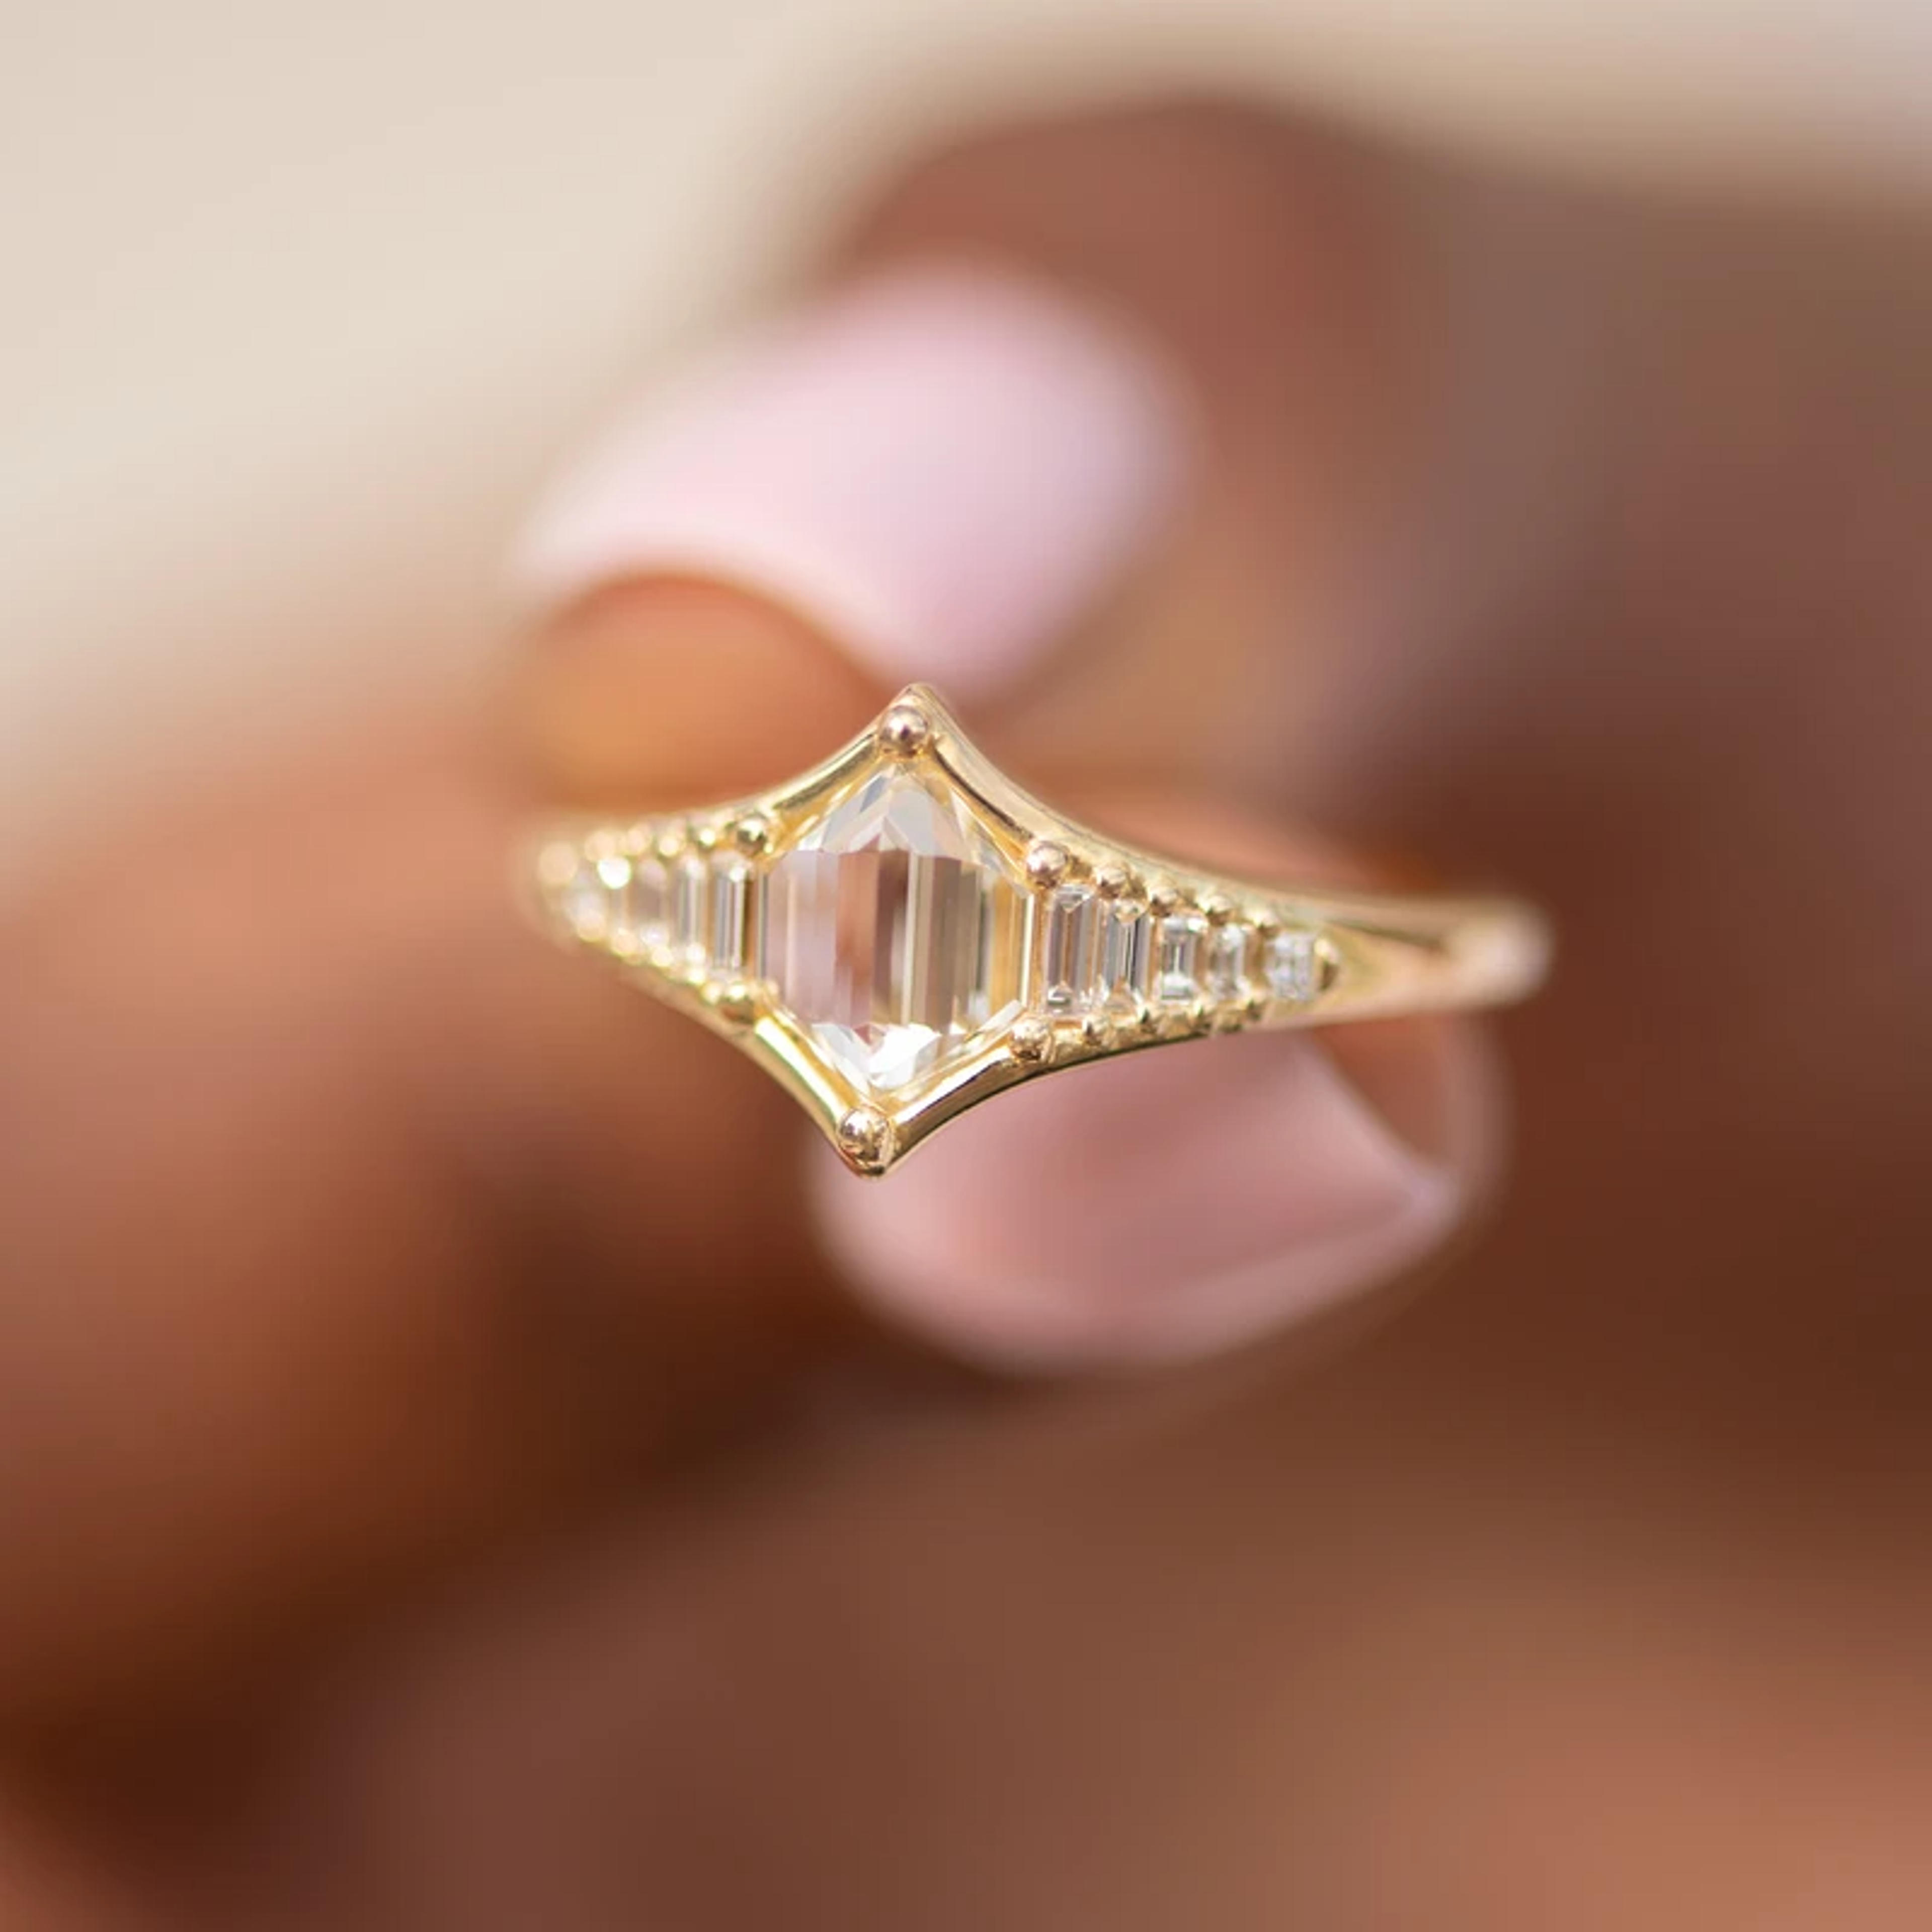 Art Deco Inspired Engagement Ring with One of a Kind step cut Diamond